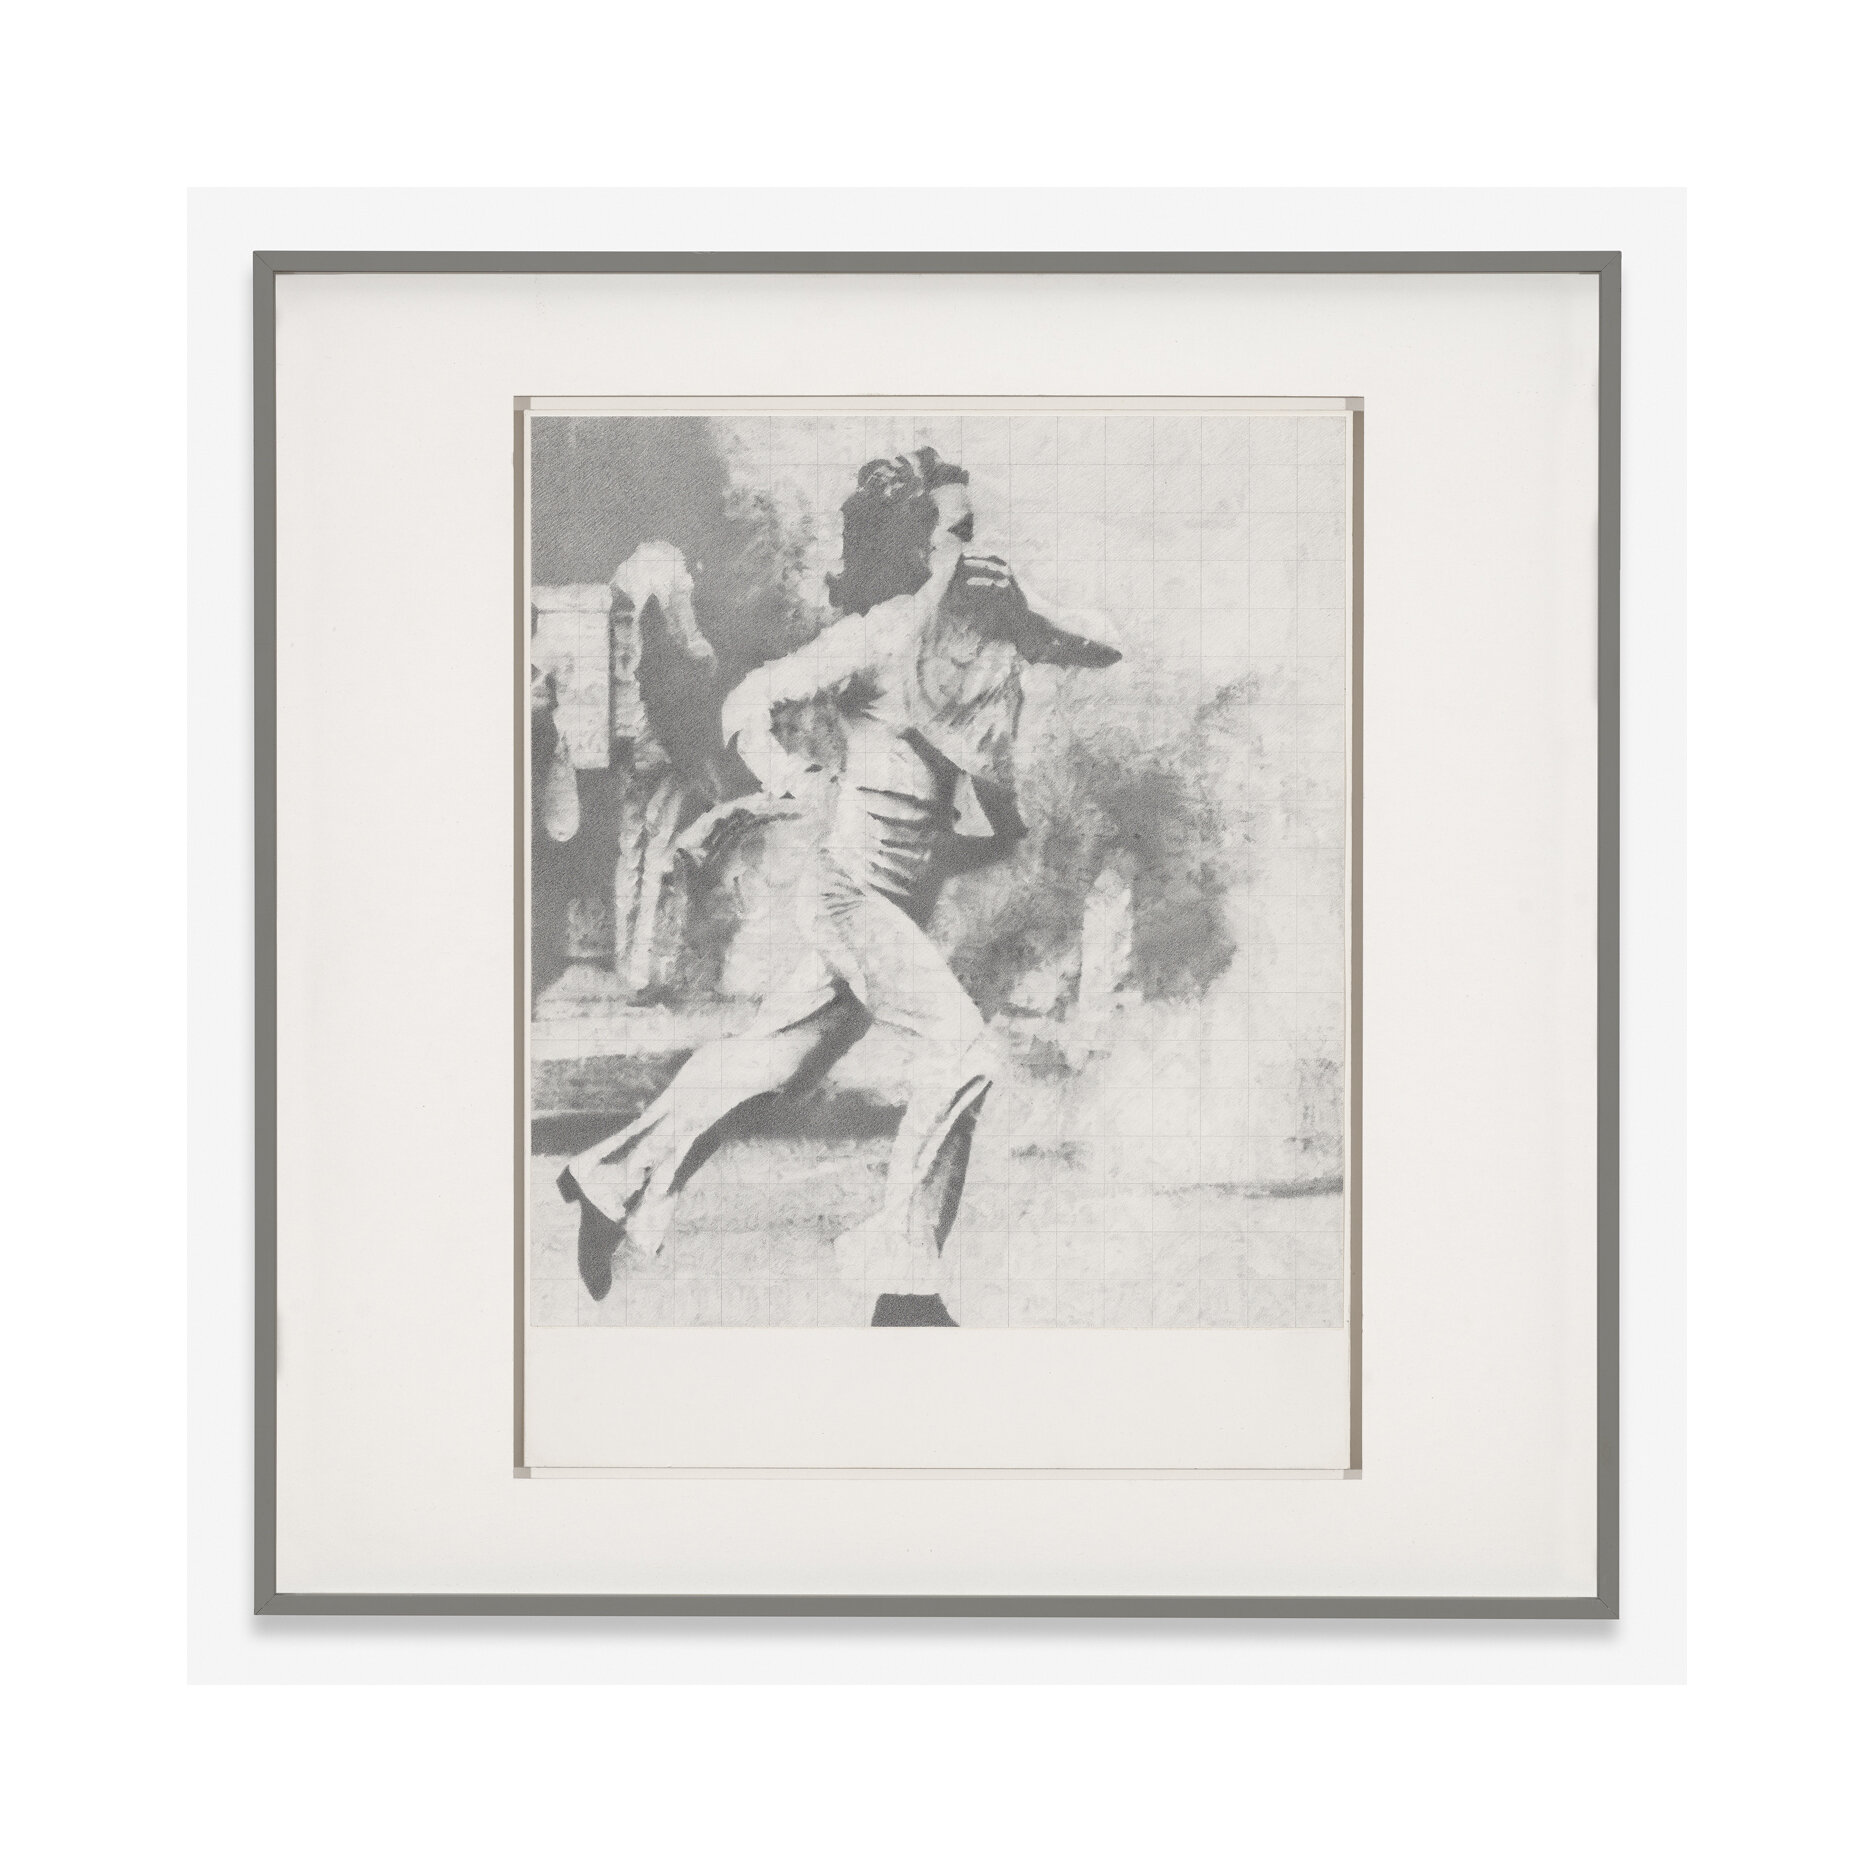   Barcelona, May 1, 1977   17 3/4 x 17 3/4 (framed), graphite on paper, 1977 